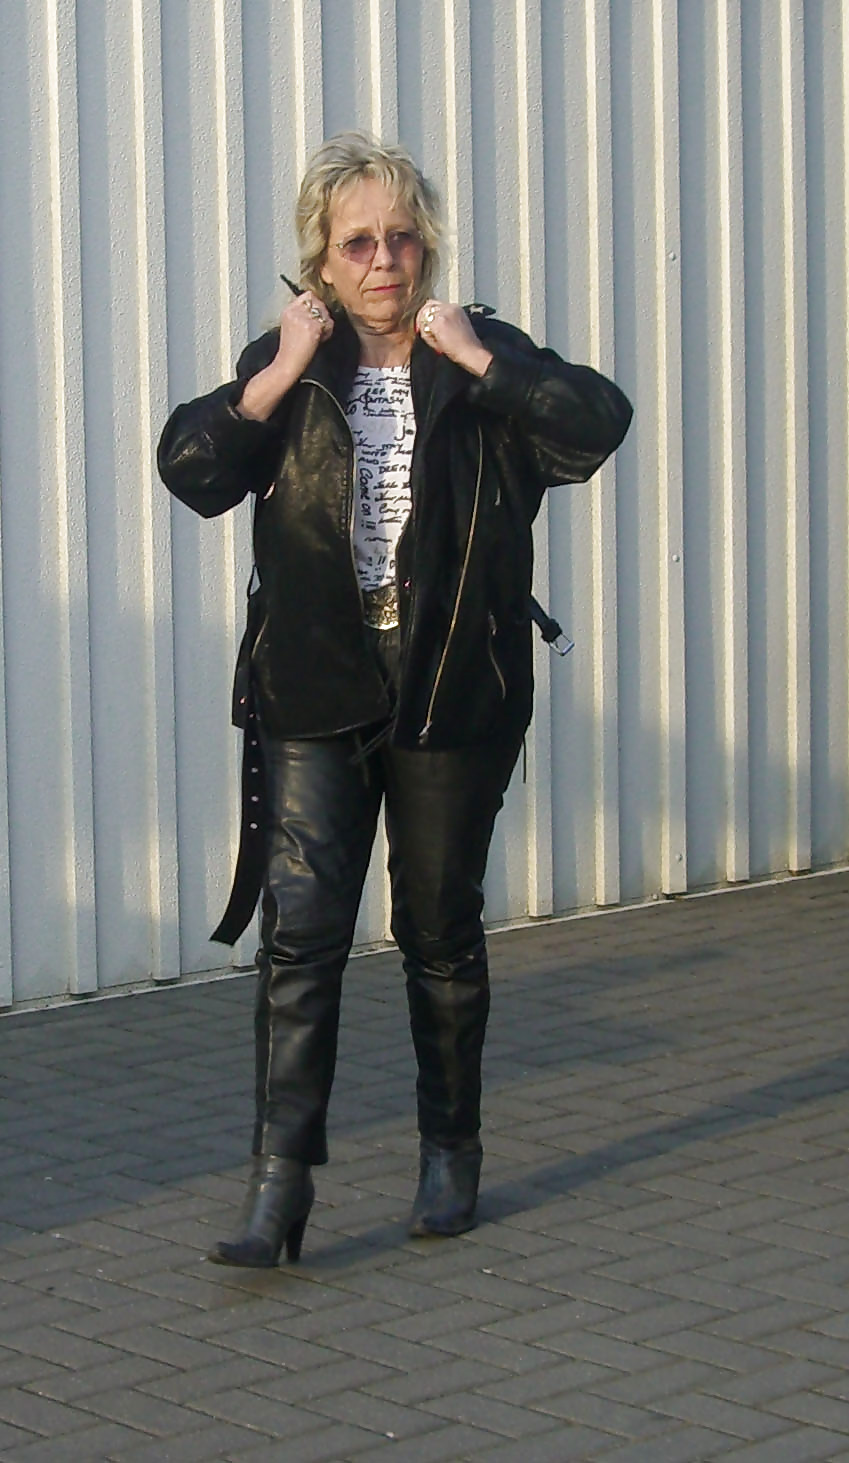 My mother in law (MIL) in leather #485938